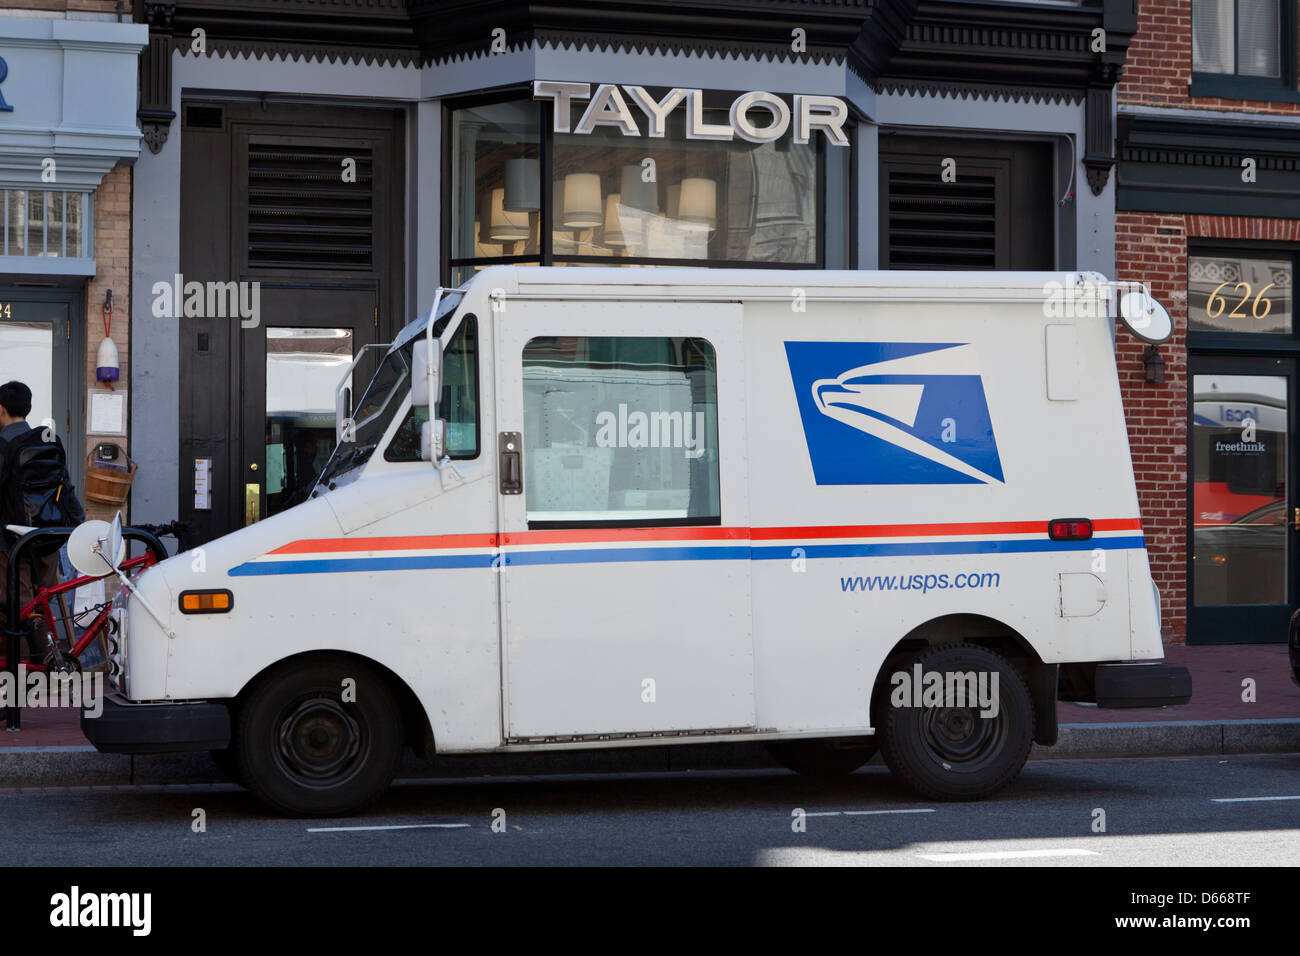 US Mail delivery truck - USA Banque D'Images